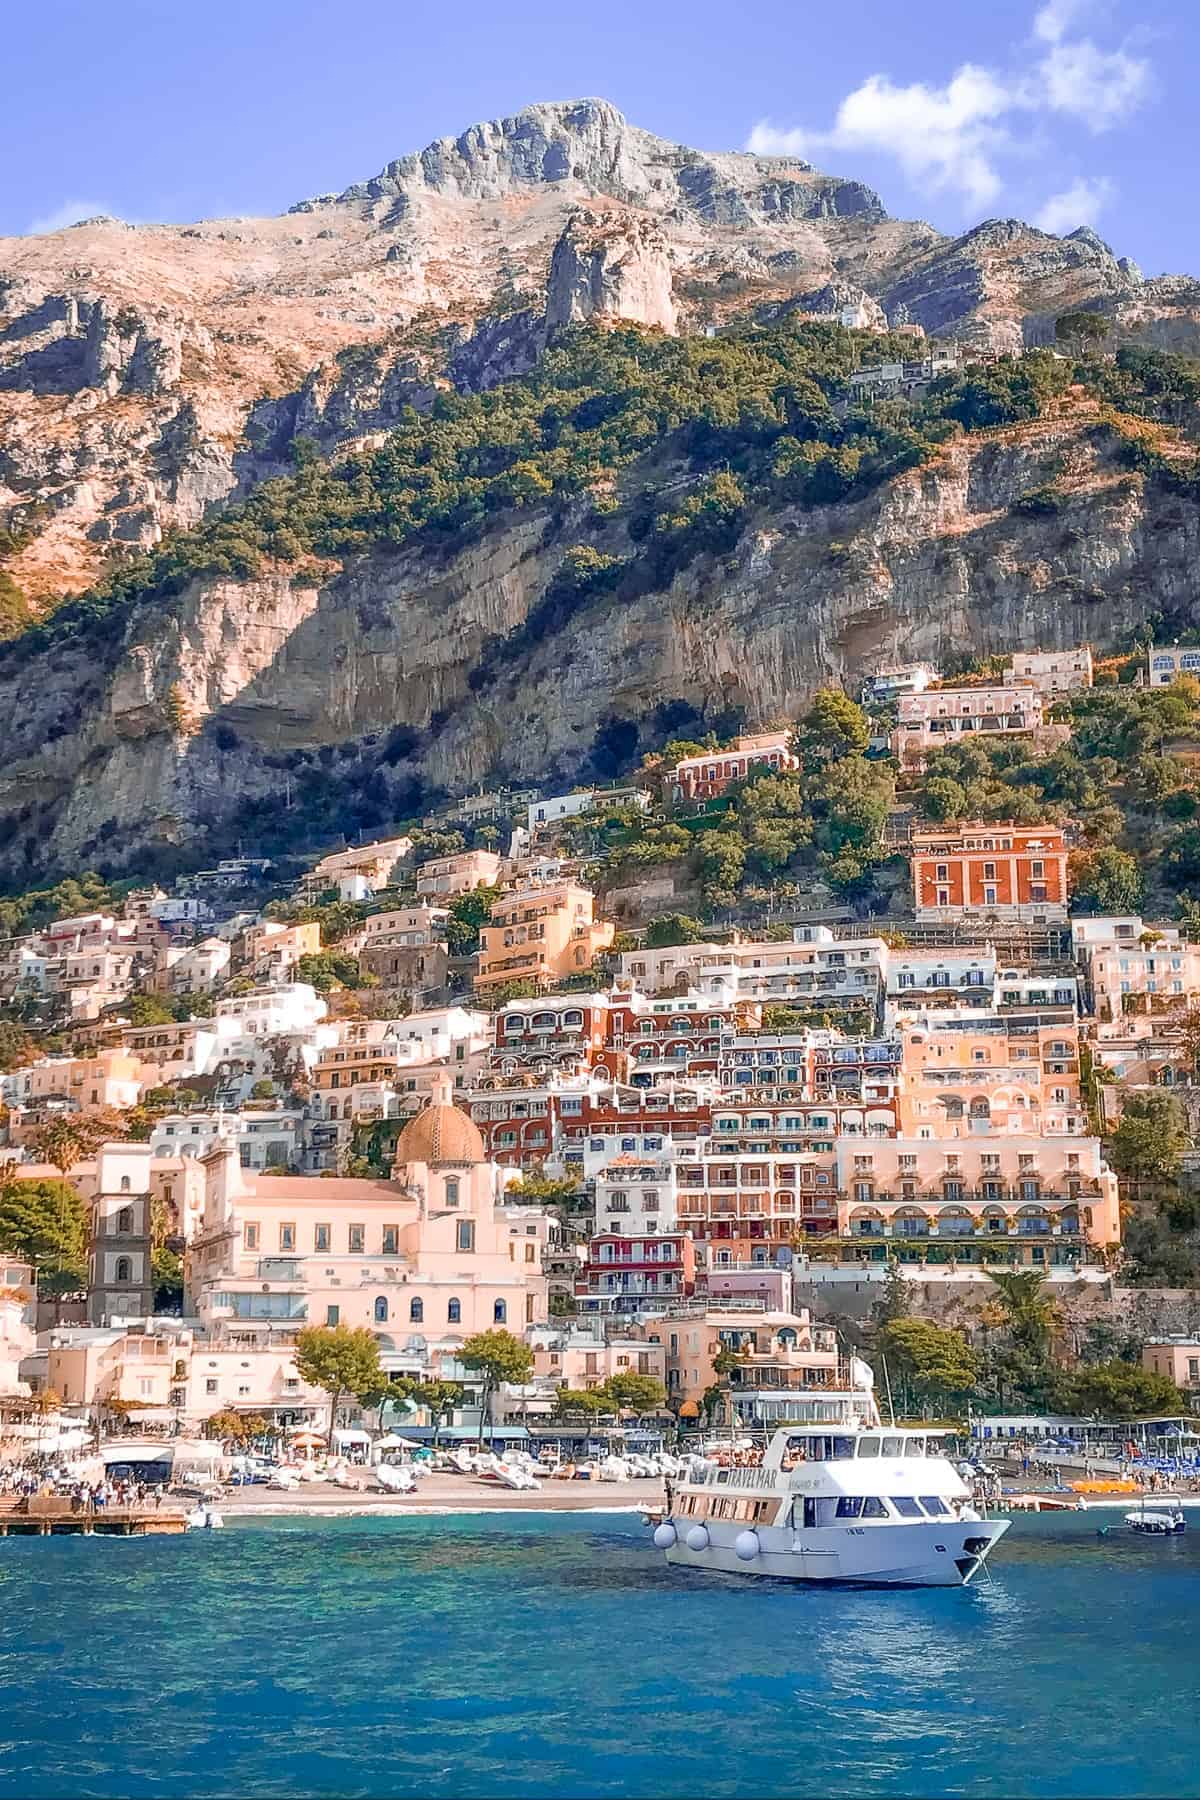 Positano, Italy, Is Beautiful but Expensive and Overrun With Tourists